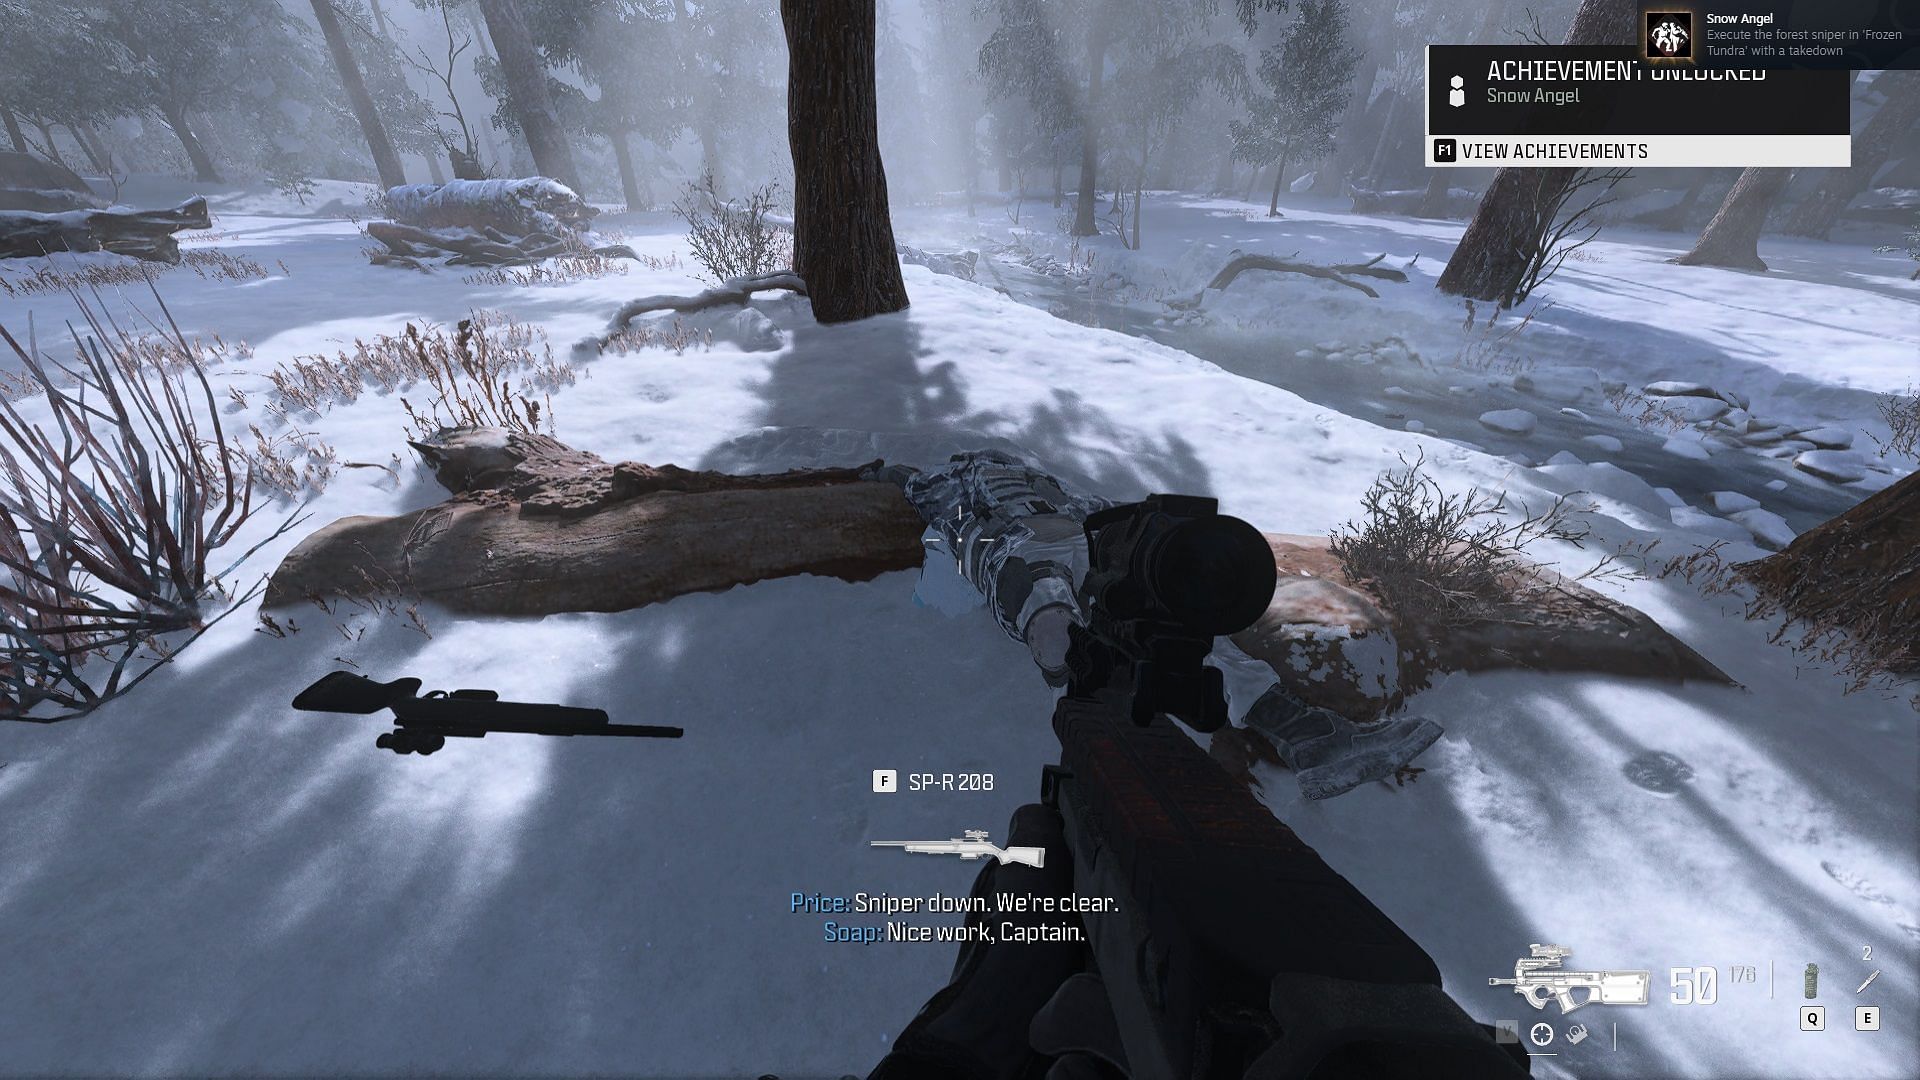 Guide to getting the Snow Angel achievement/trophy in Modern Warfare 3 campaign mission 11 